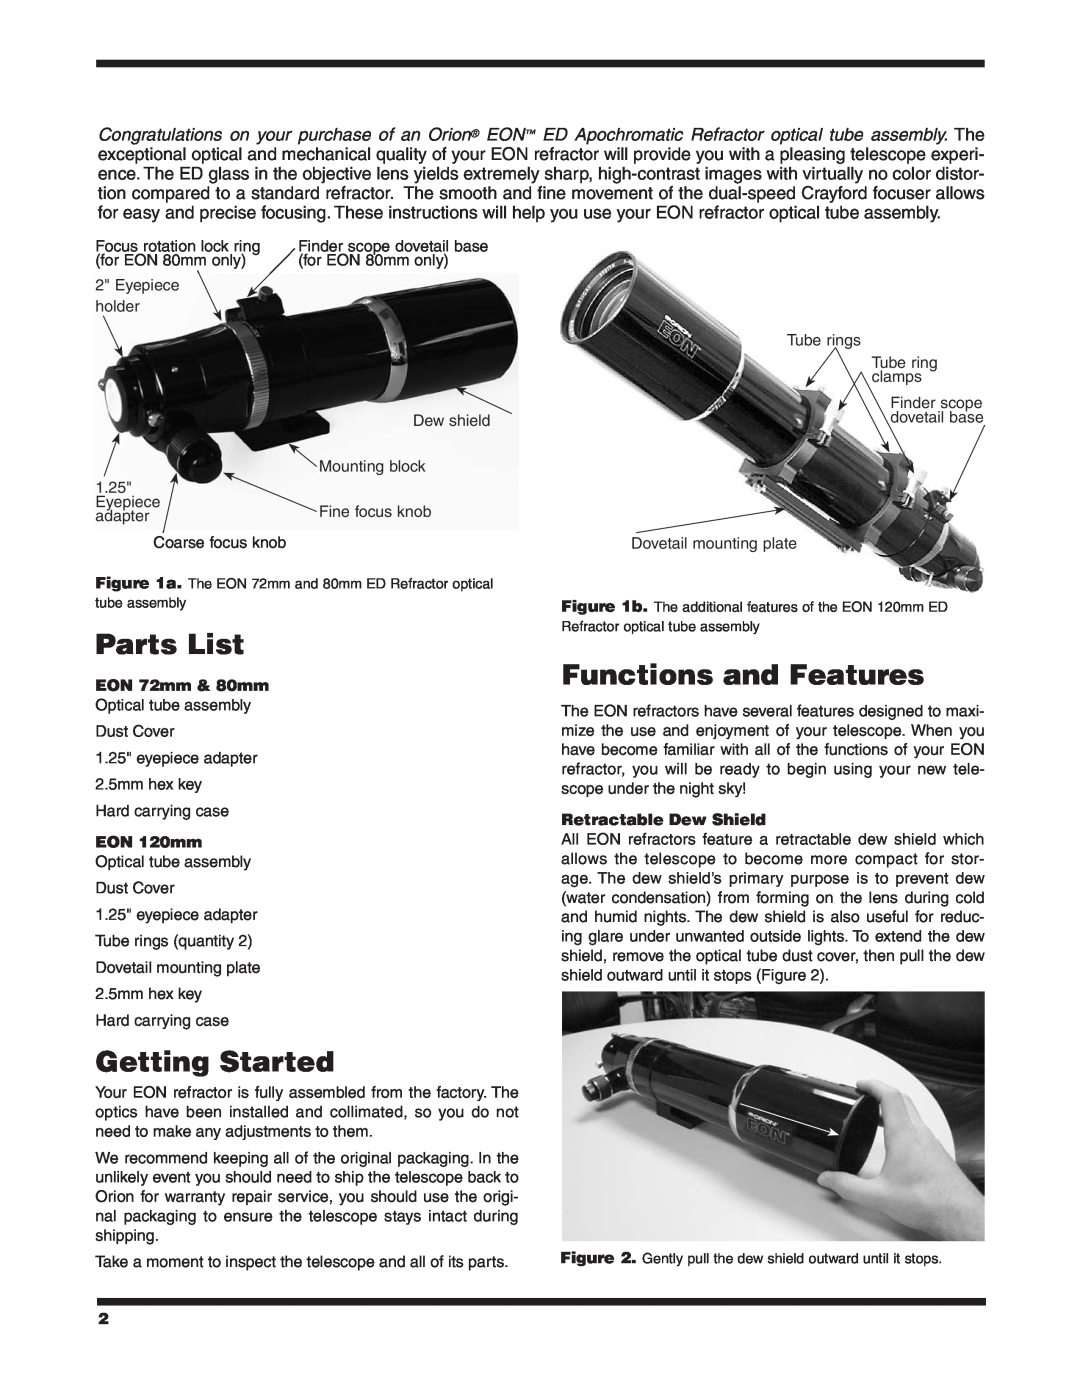 Orion 9925, 9781, 9927 Parts List, Getting Started, Functions and Features, EON 72mm & 80mm Optical tube assembly 